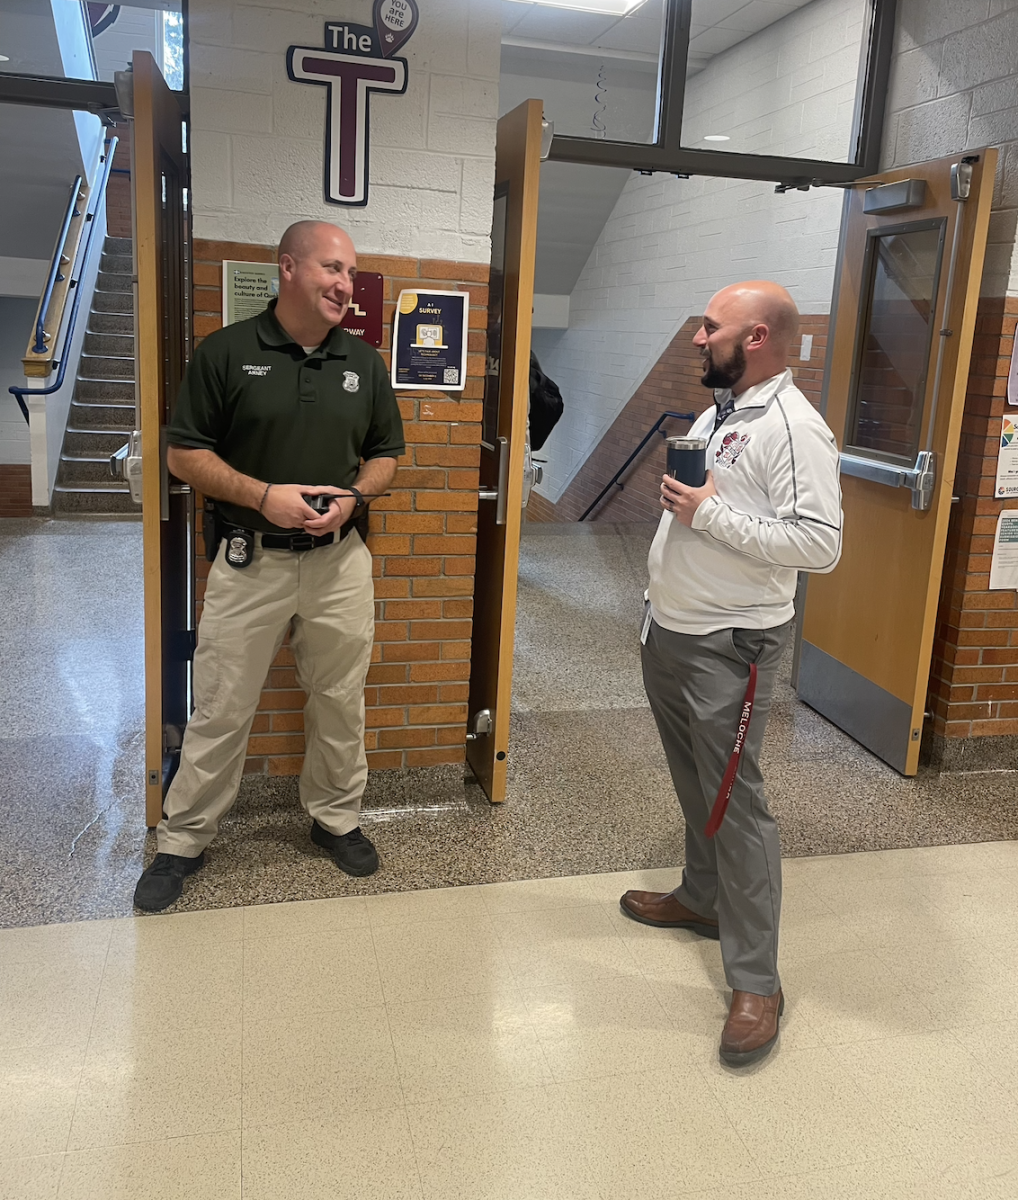 Mr. Meloche and Sgt. Arney at the T during passing time.